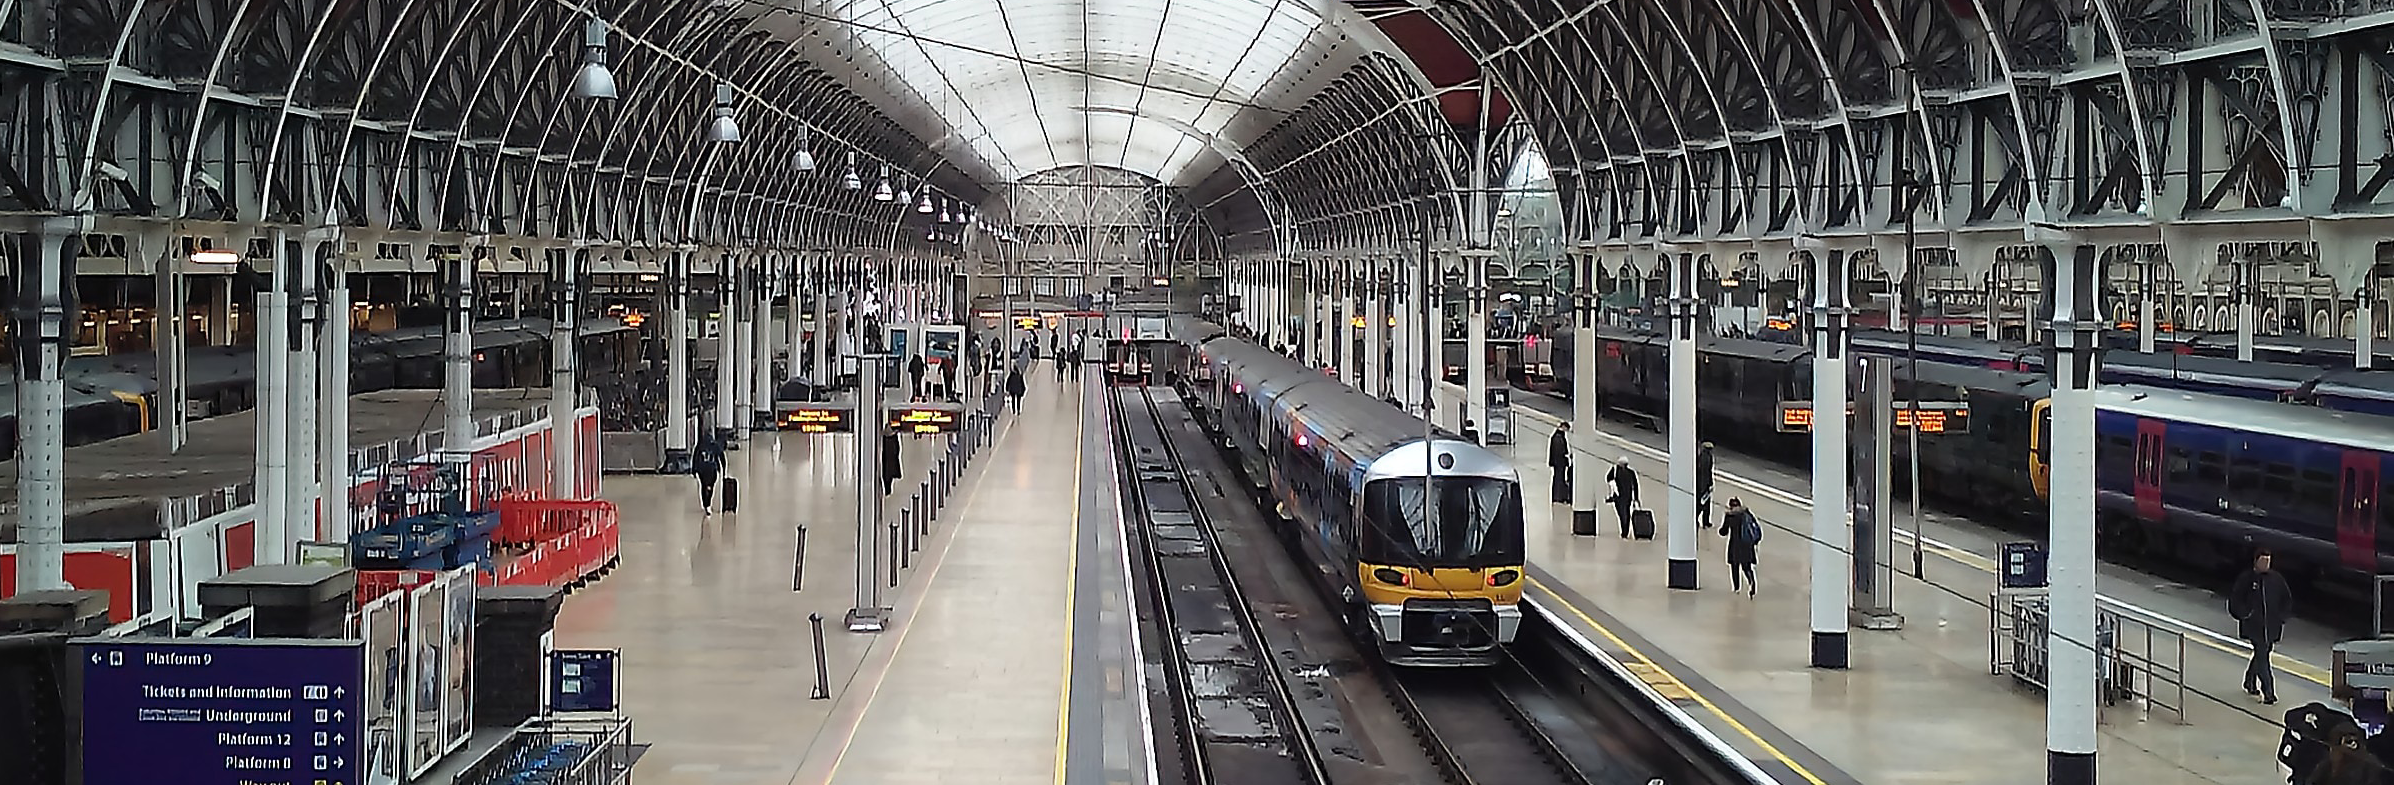 View of Paddington Station in Central London